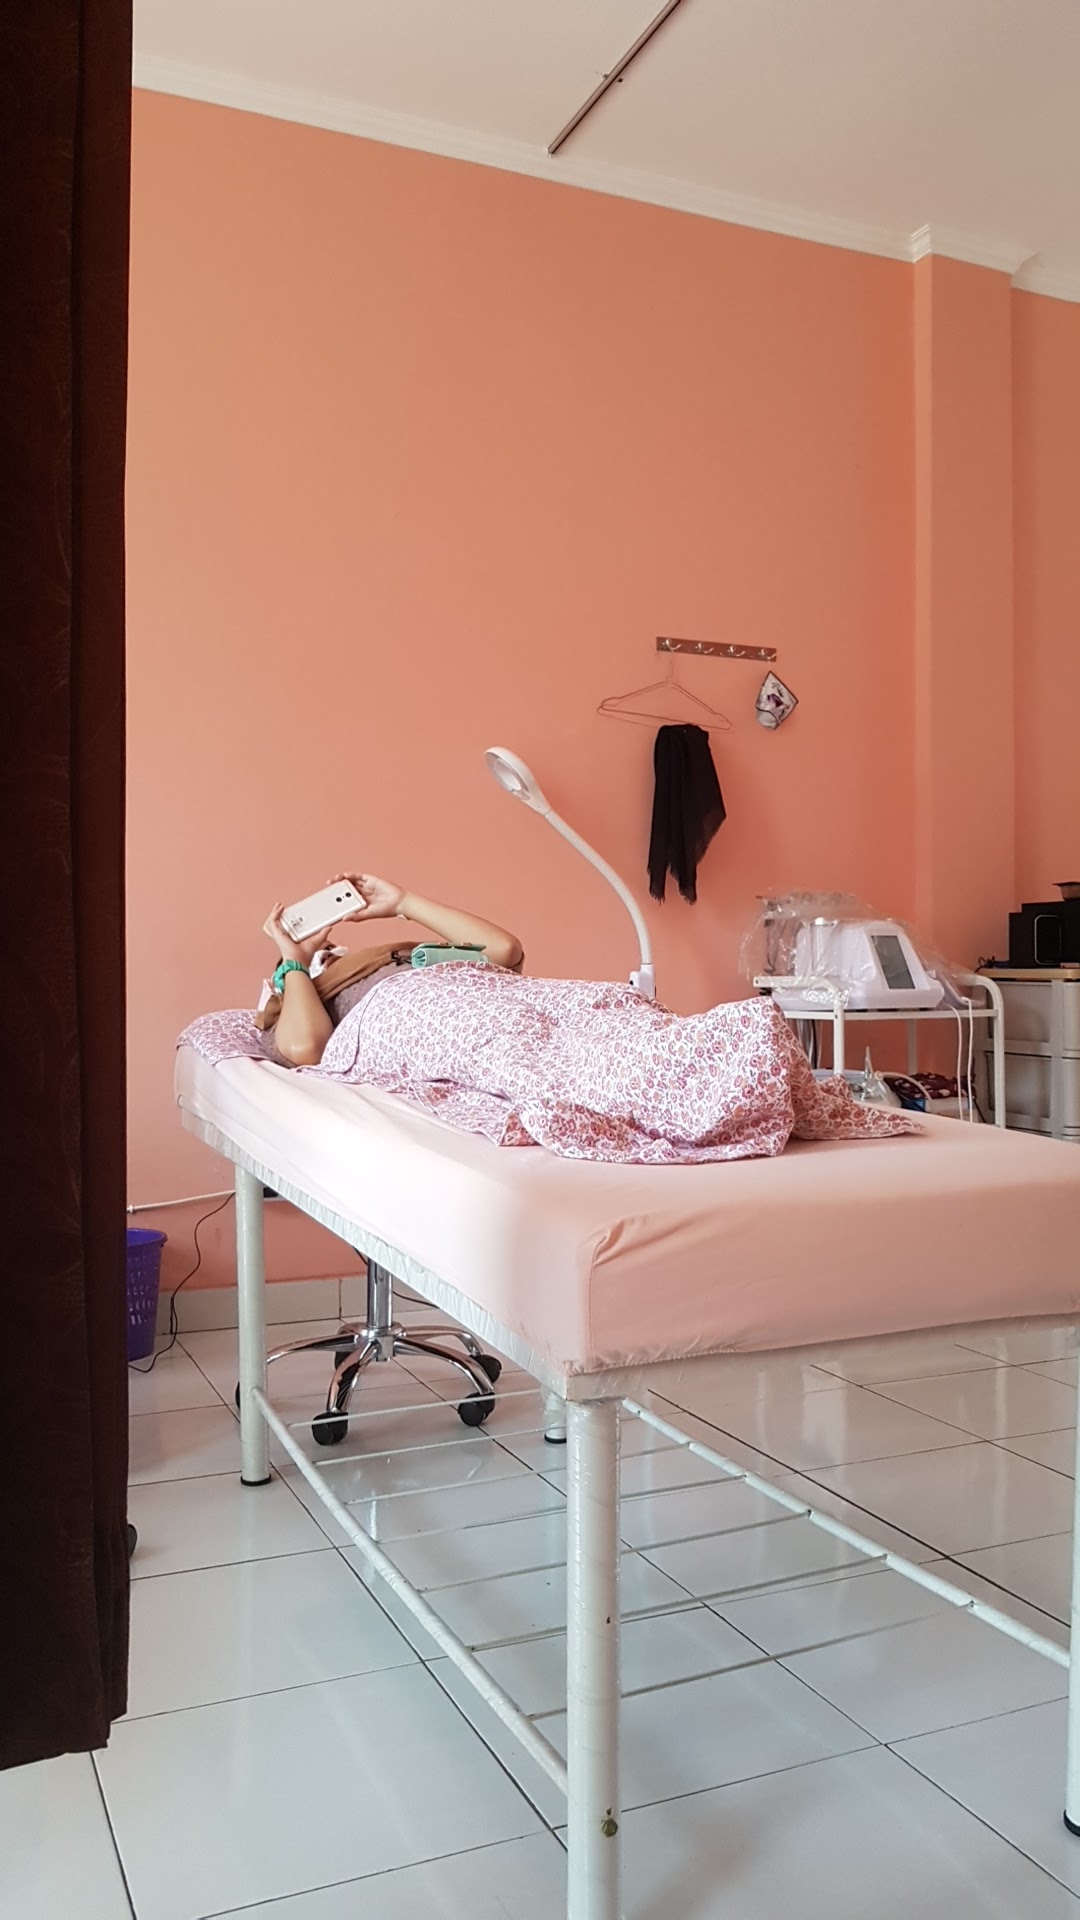 Dr Ayu Beauty Care